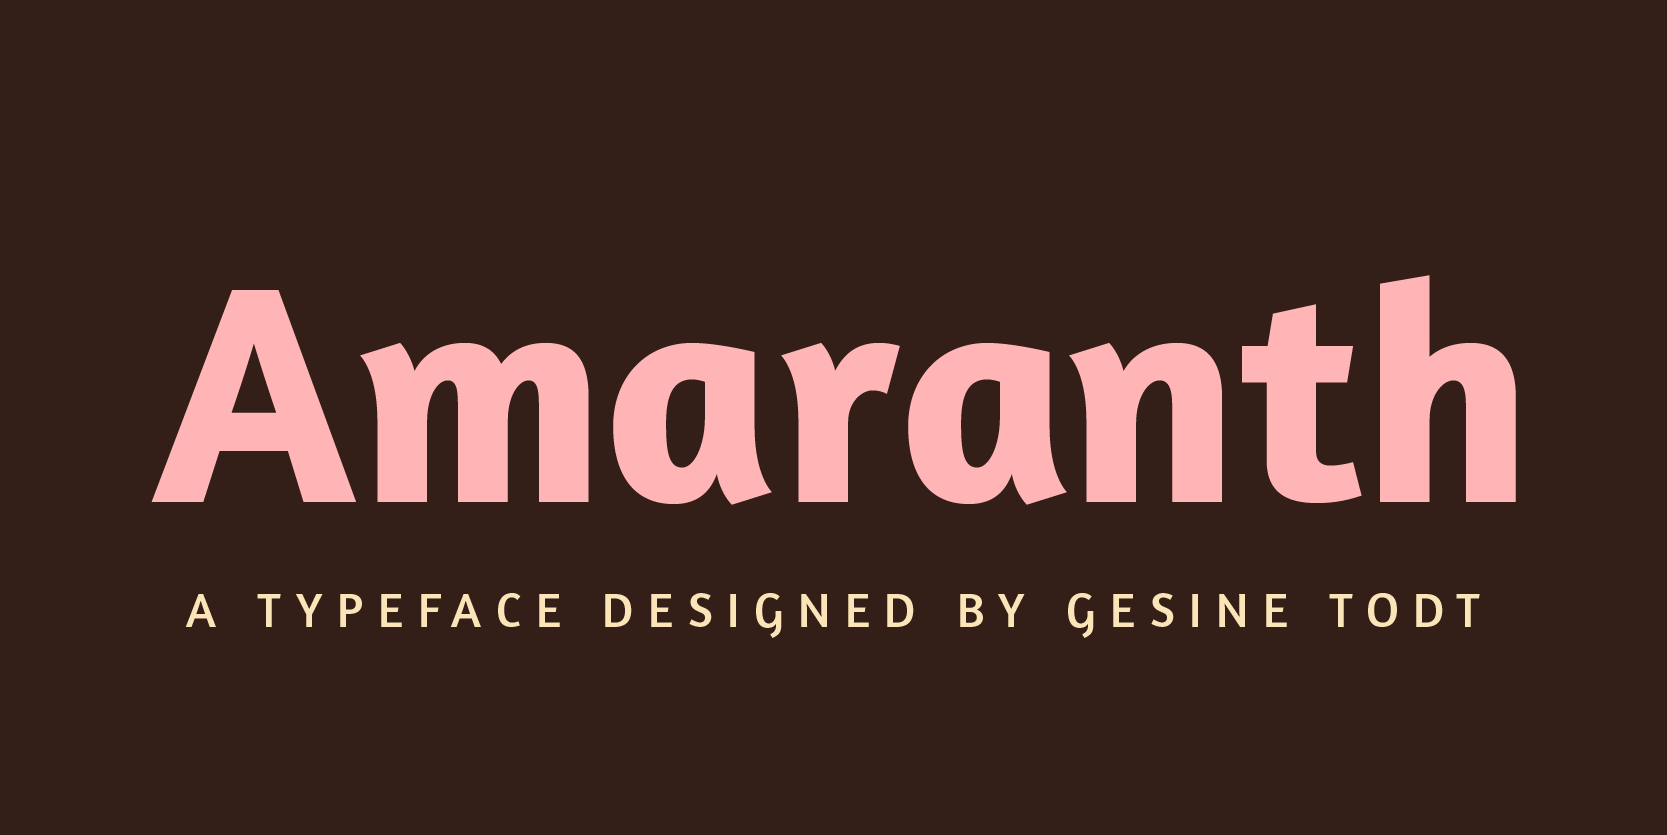 Card displaying Amaranth typeface in various styles